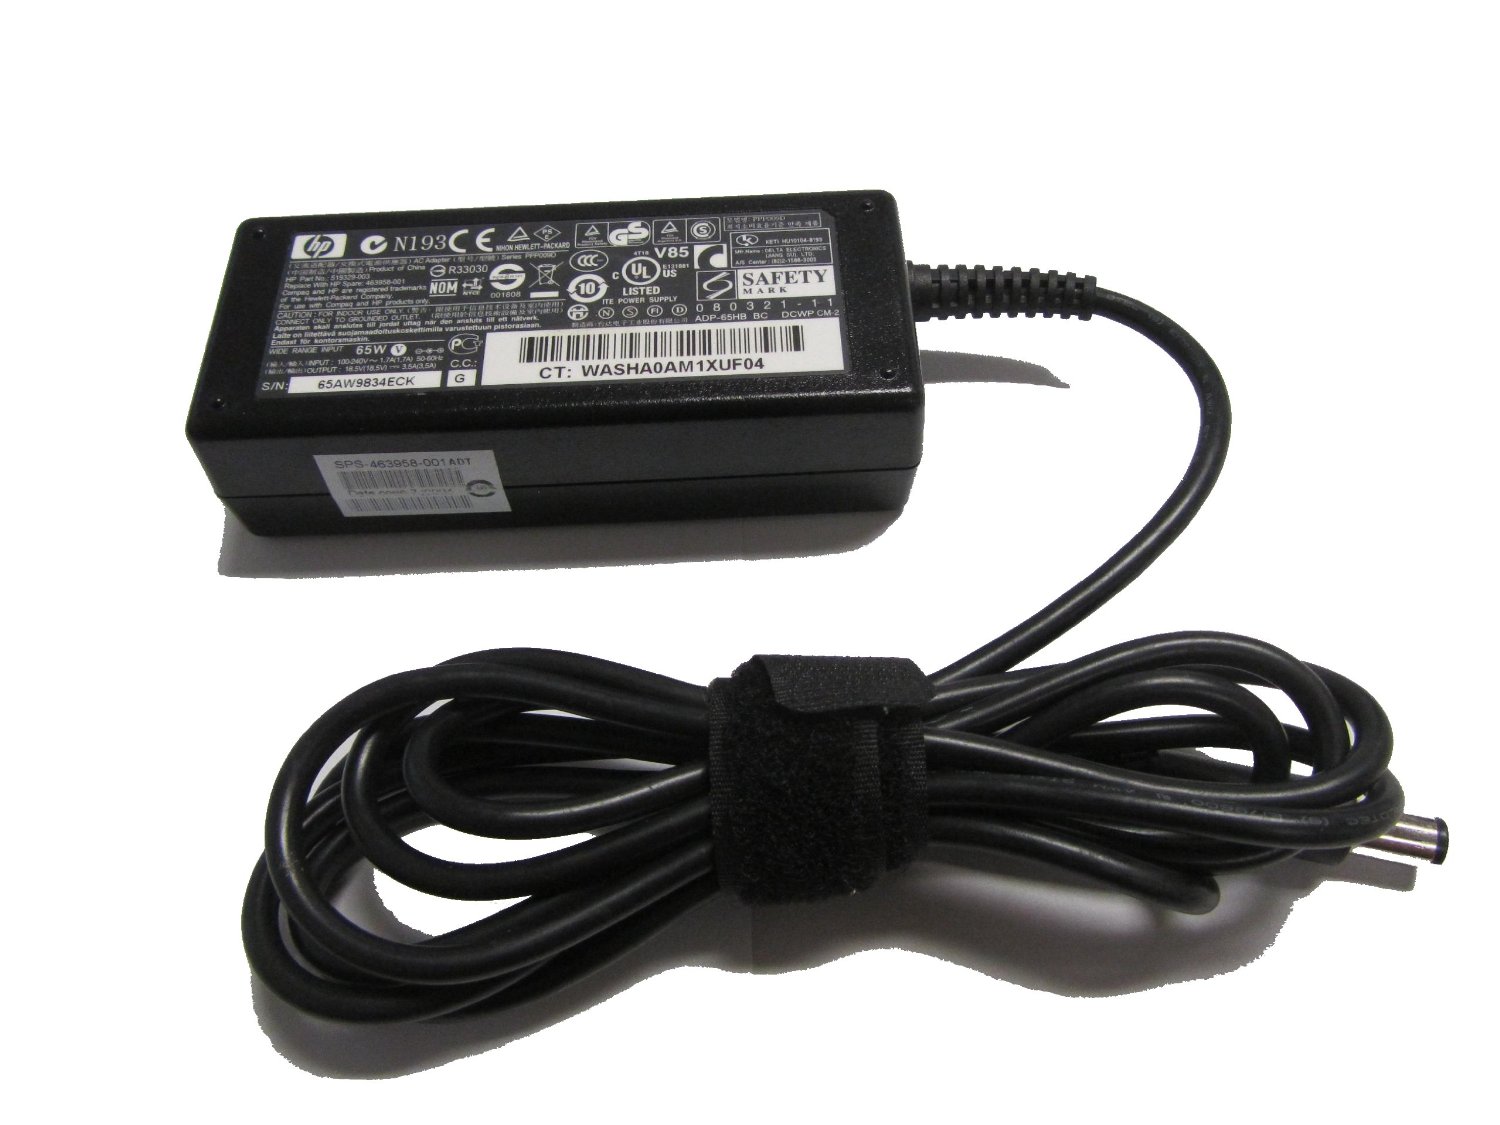 Original Adapter Charger For HP ProBook 640 G1